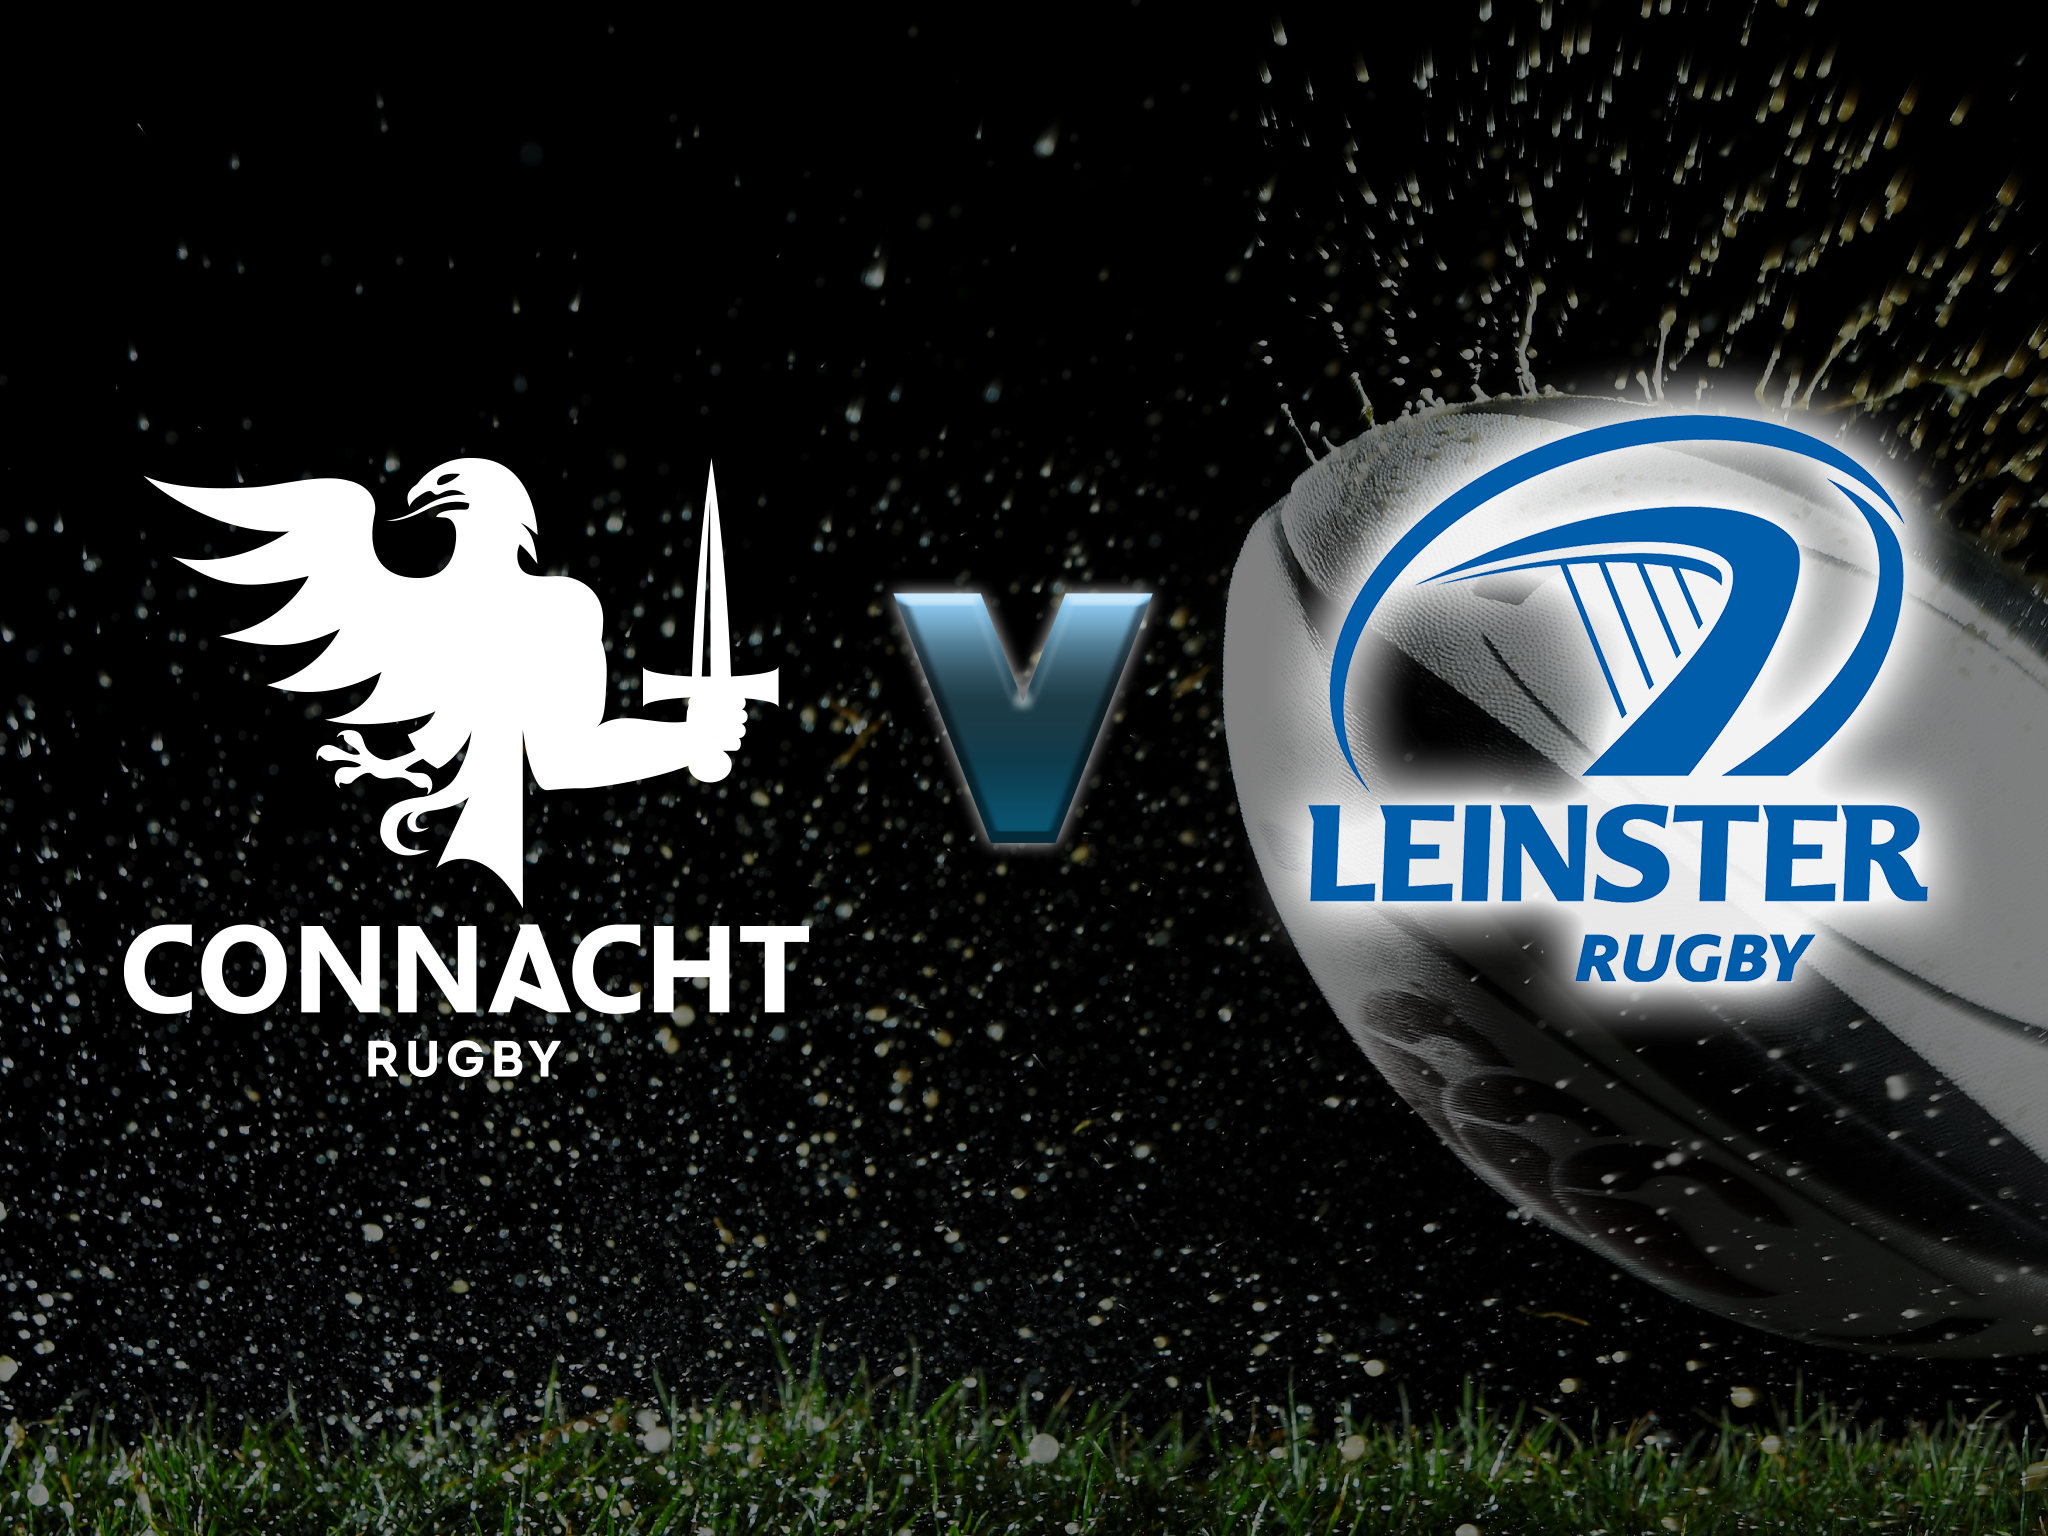 connacht rugby vs leinster rugby